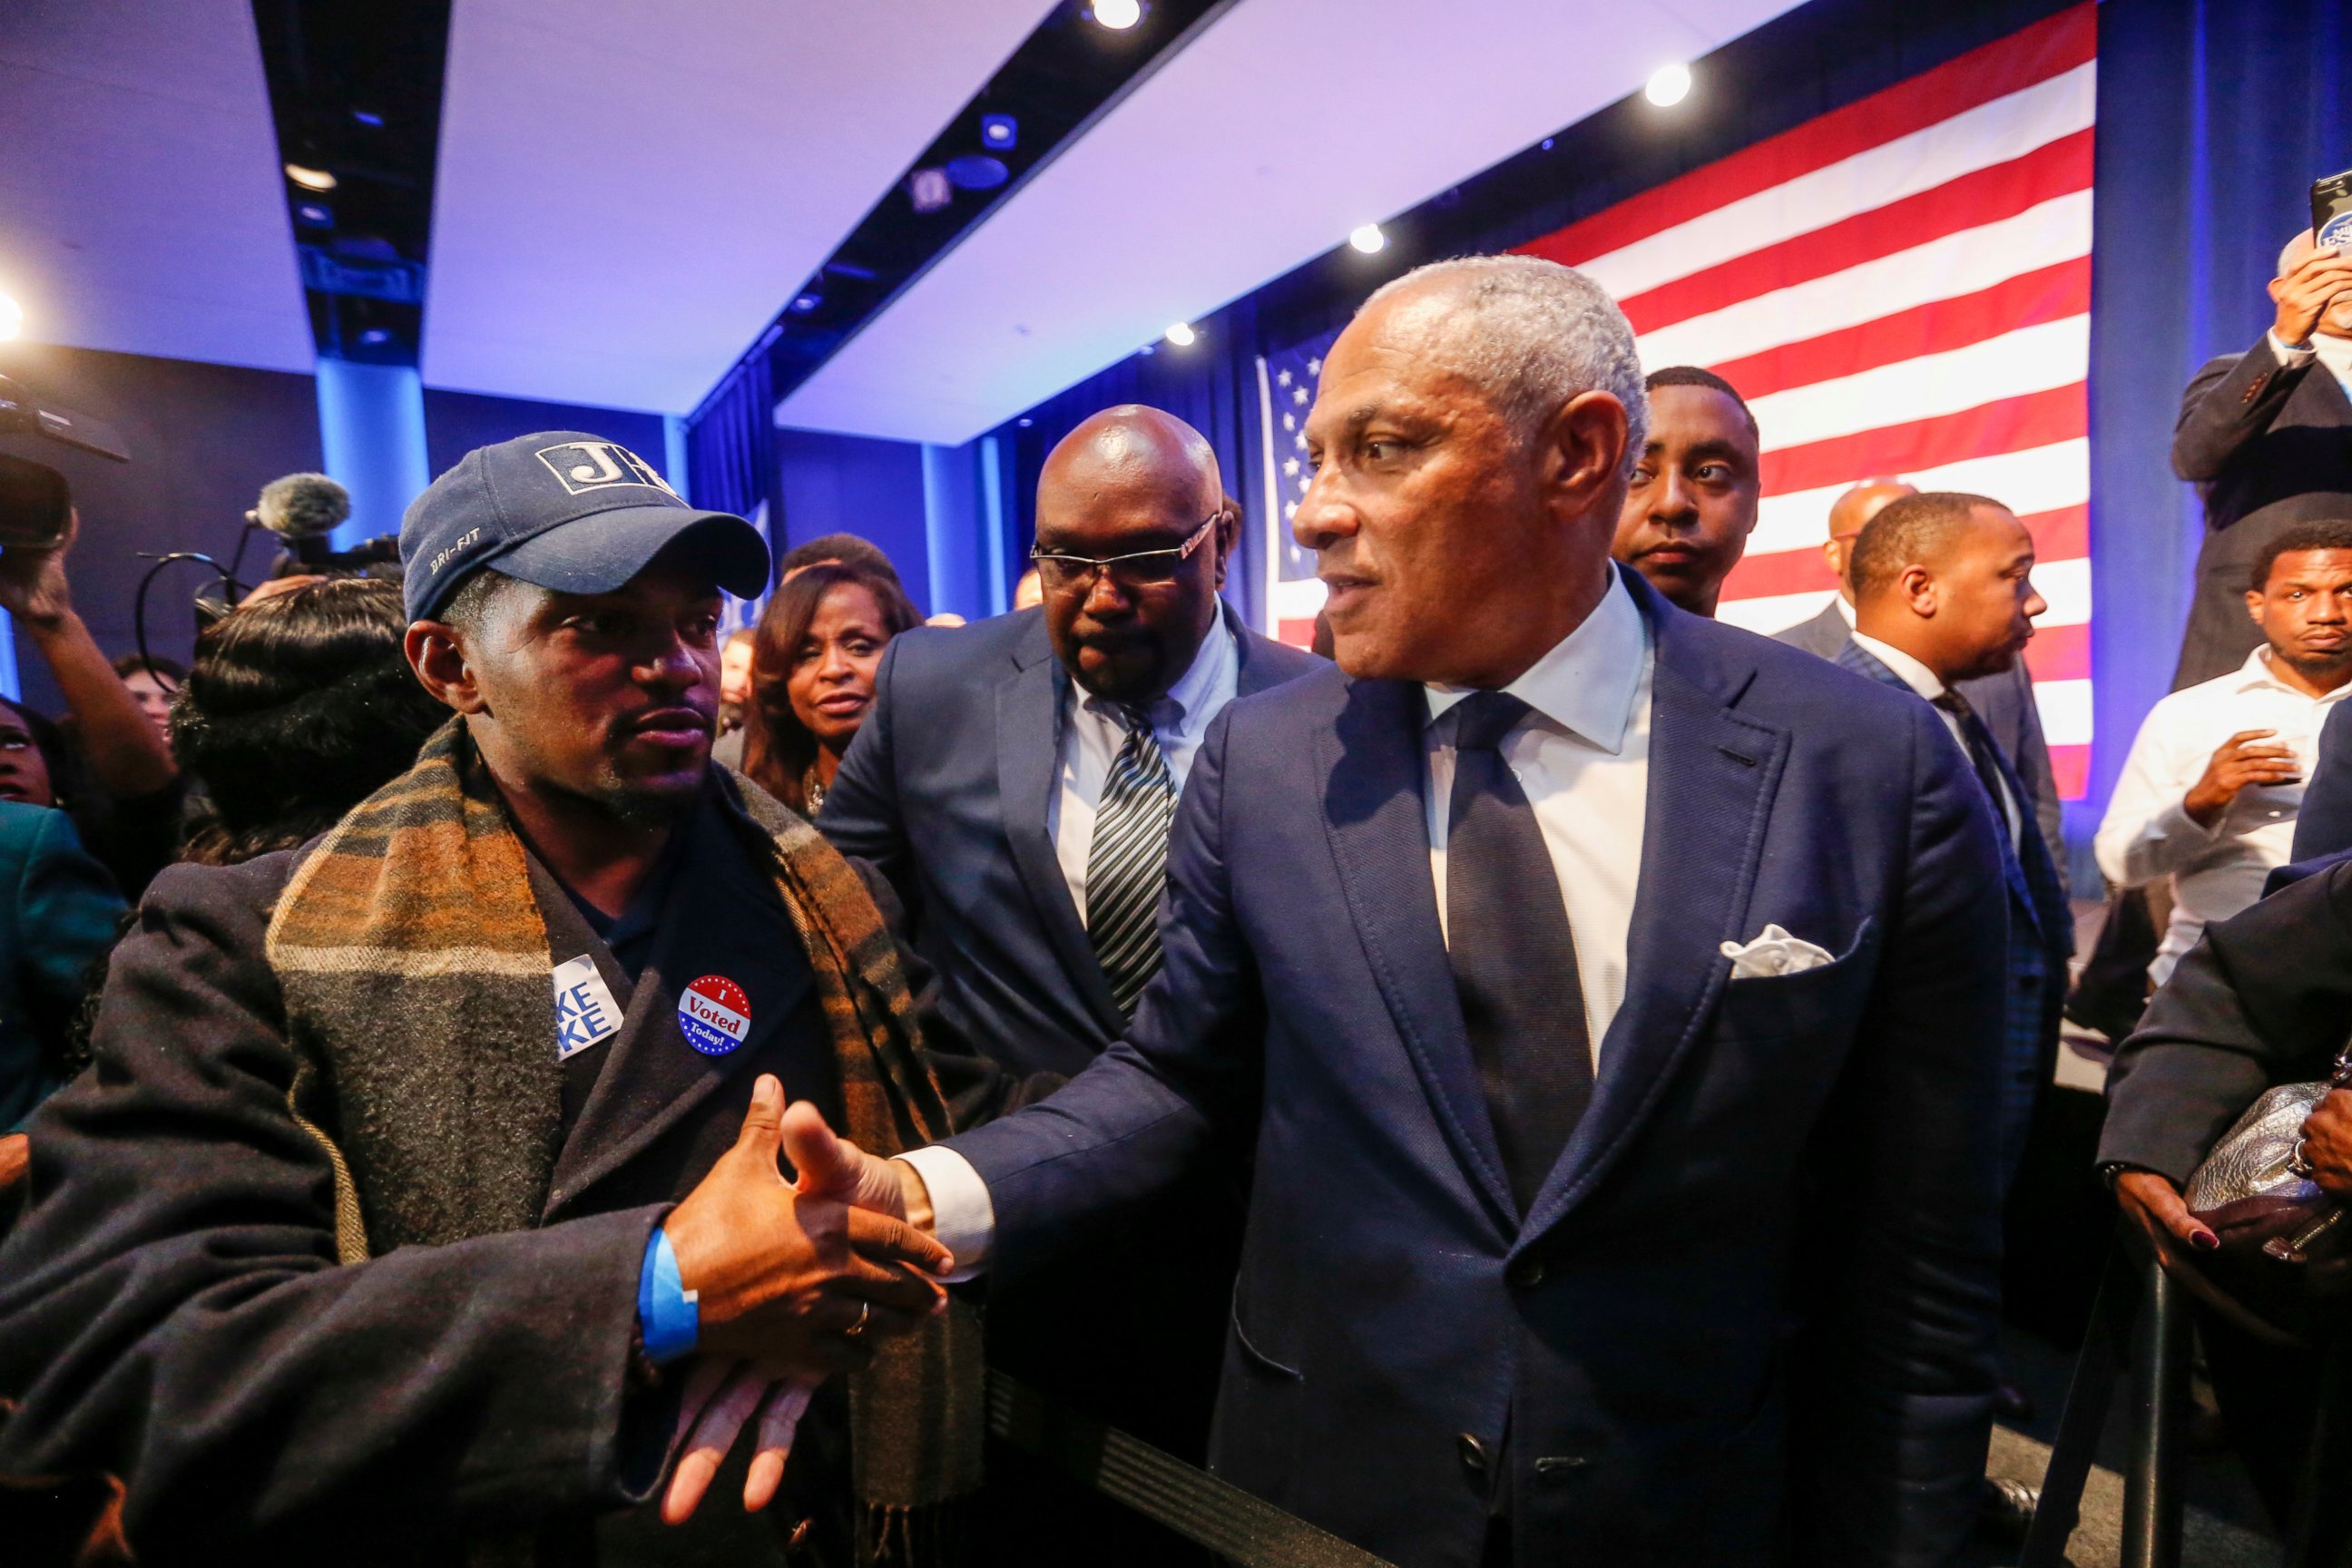 Democrat Mike Espy, right, who sought to unseat U.S. Sen. Cindy Hyde-Smith, R-Miss., shakes hands with a supporter in a crowded auditorium at the Mississippi Civil Rights Museum in Jackson, Miss., after losing the runoff election Tuesday, Nov. 27, 2018.